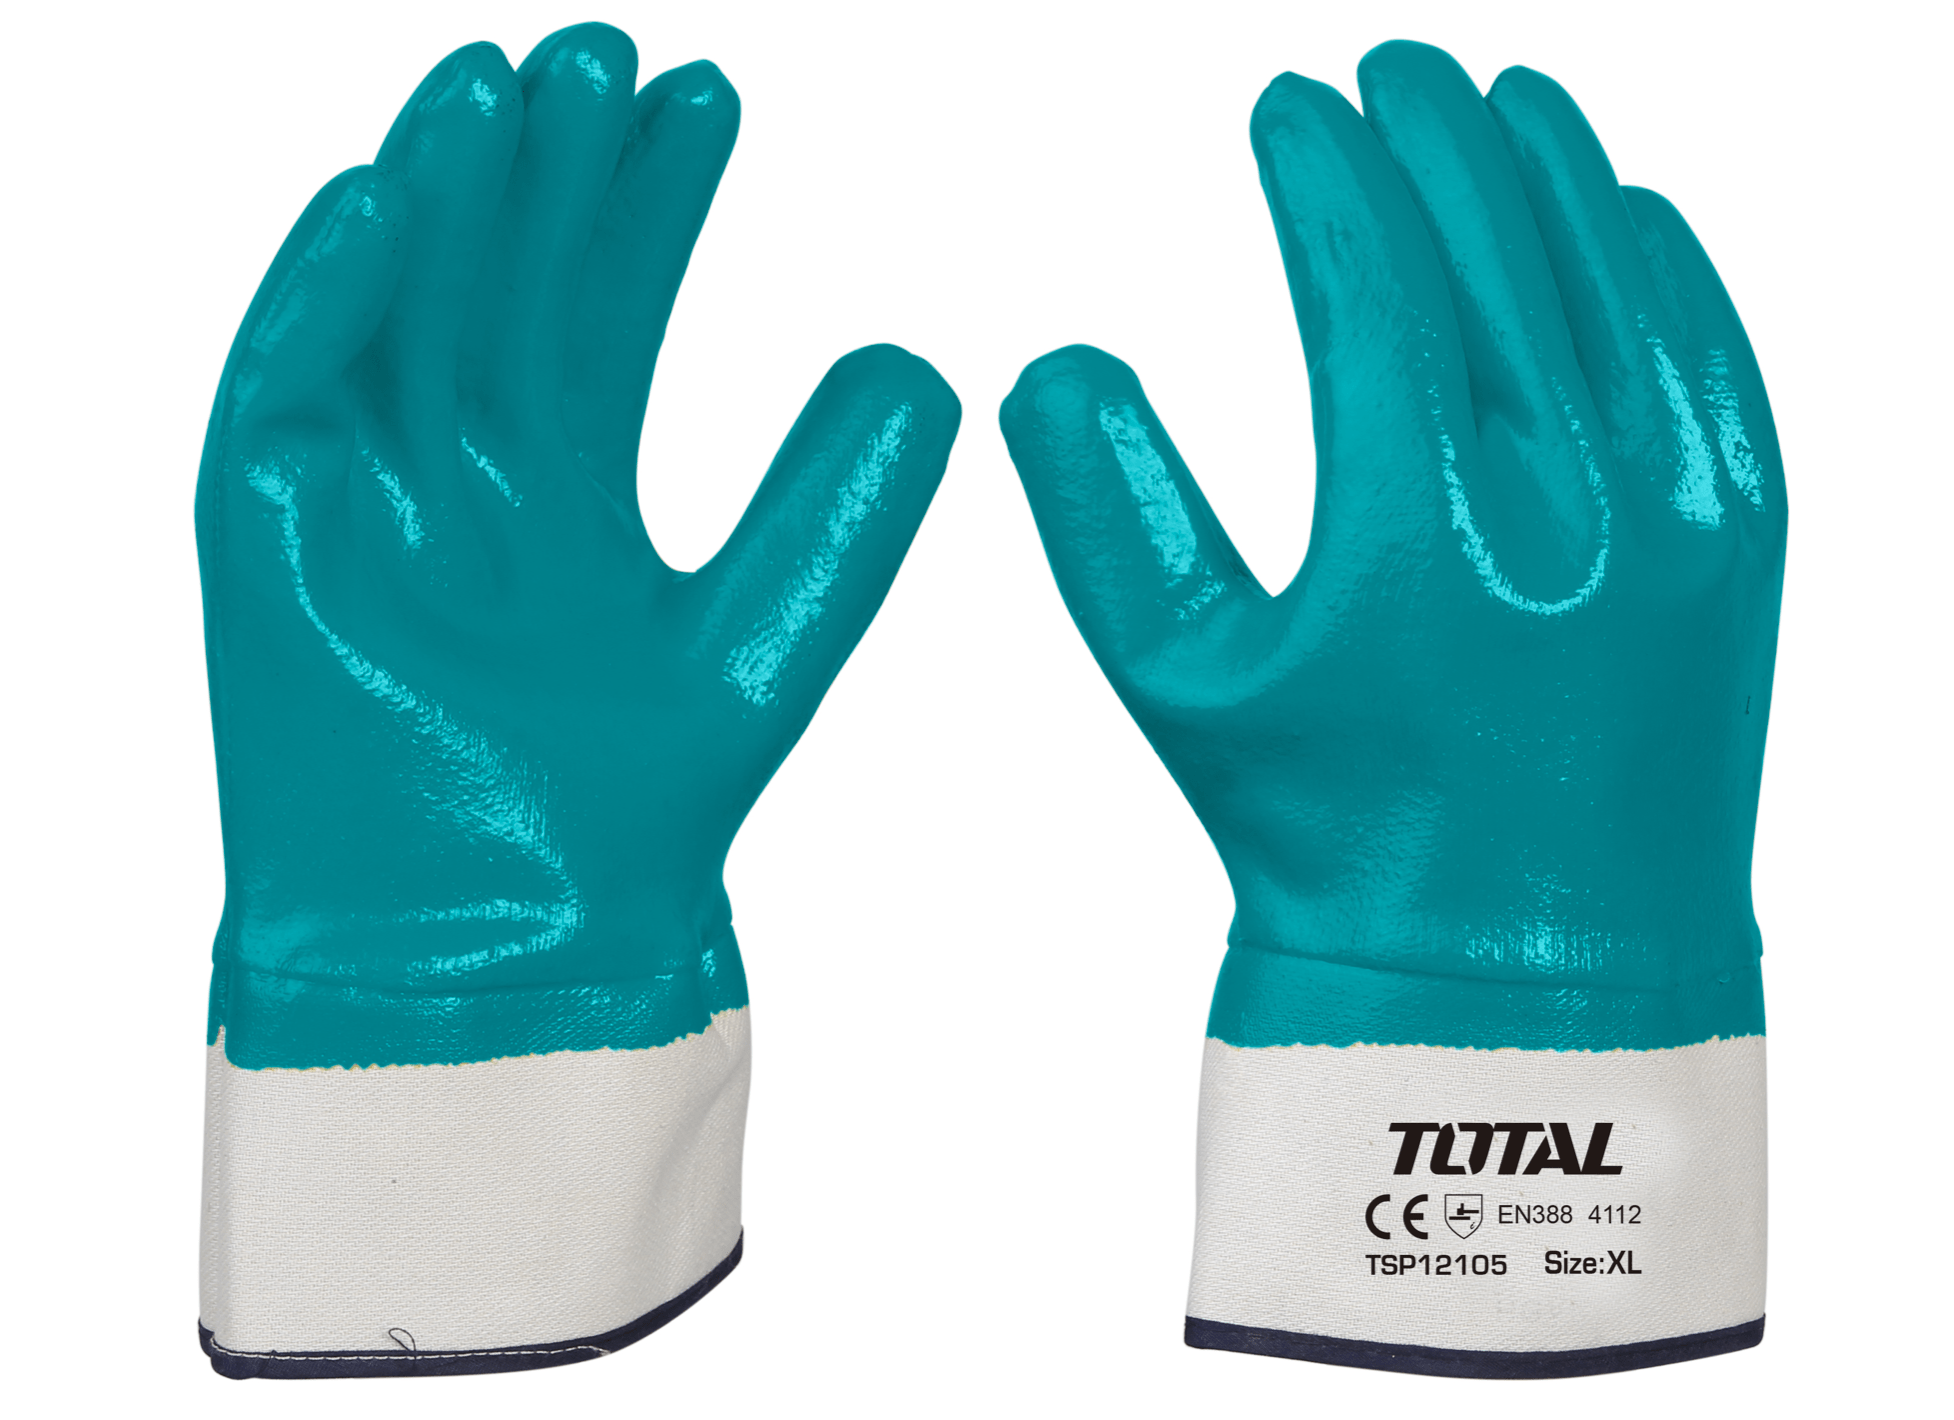 Total Heavy Duty Nitrile Glove - TSP12105 | Supply Master | Accra, Ghana Tools Building Steel Engineering Hardware tool